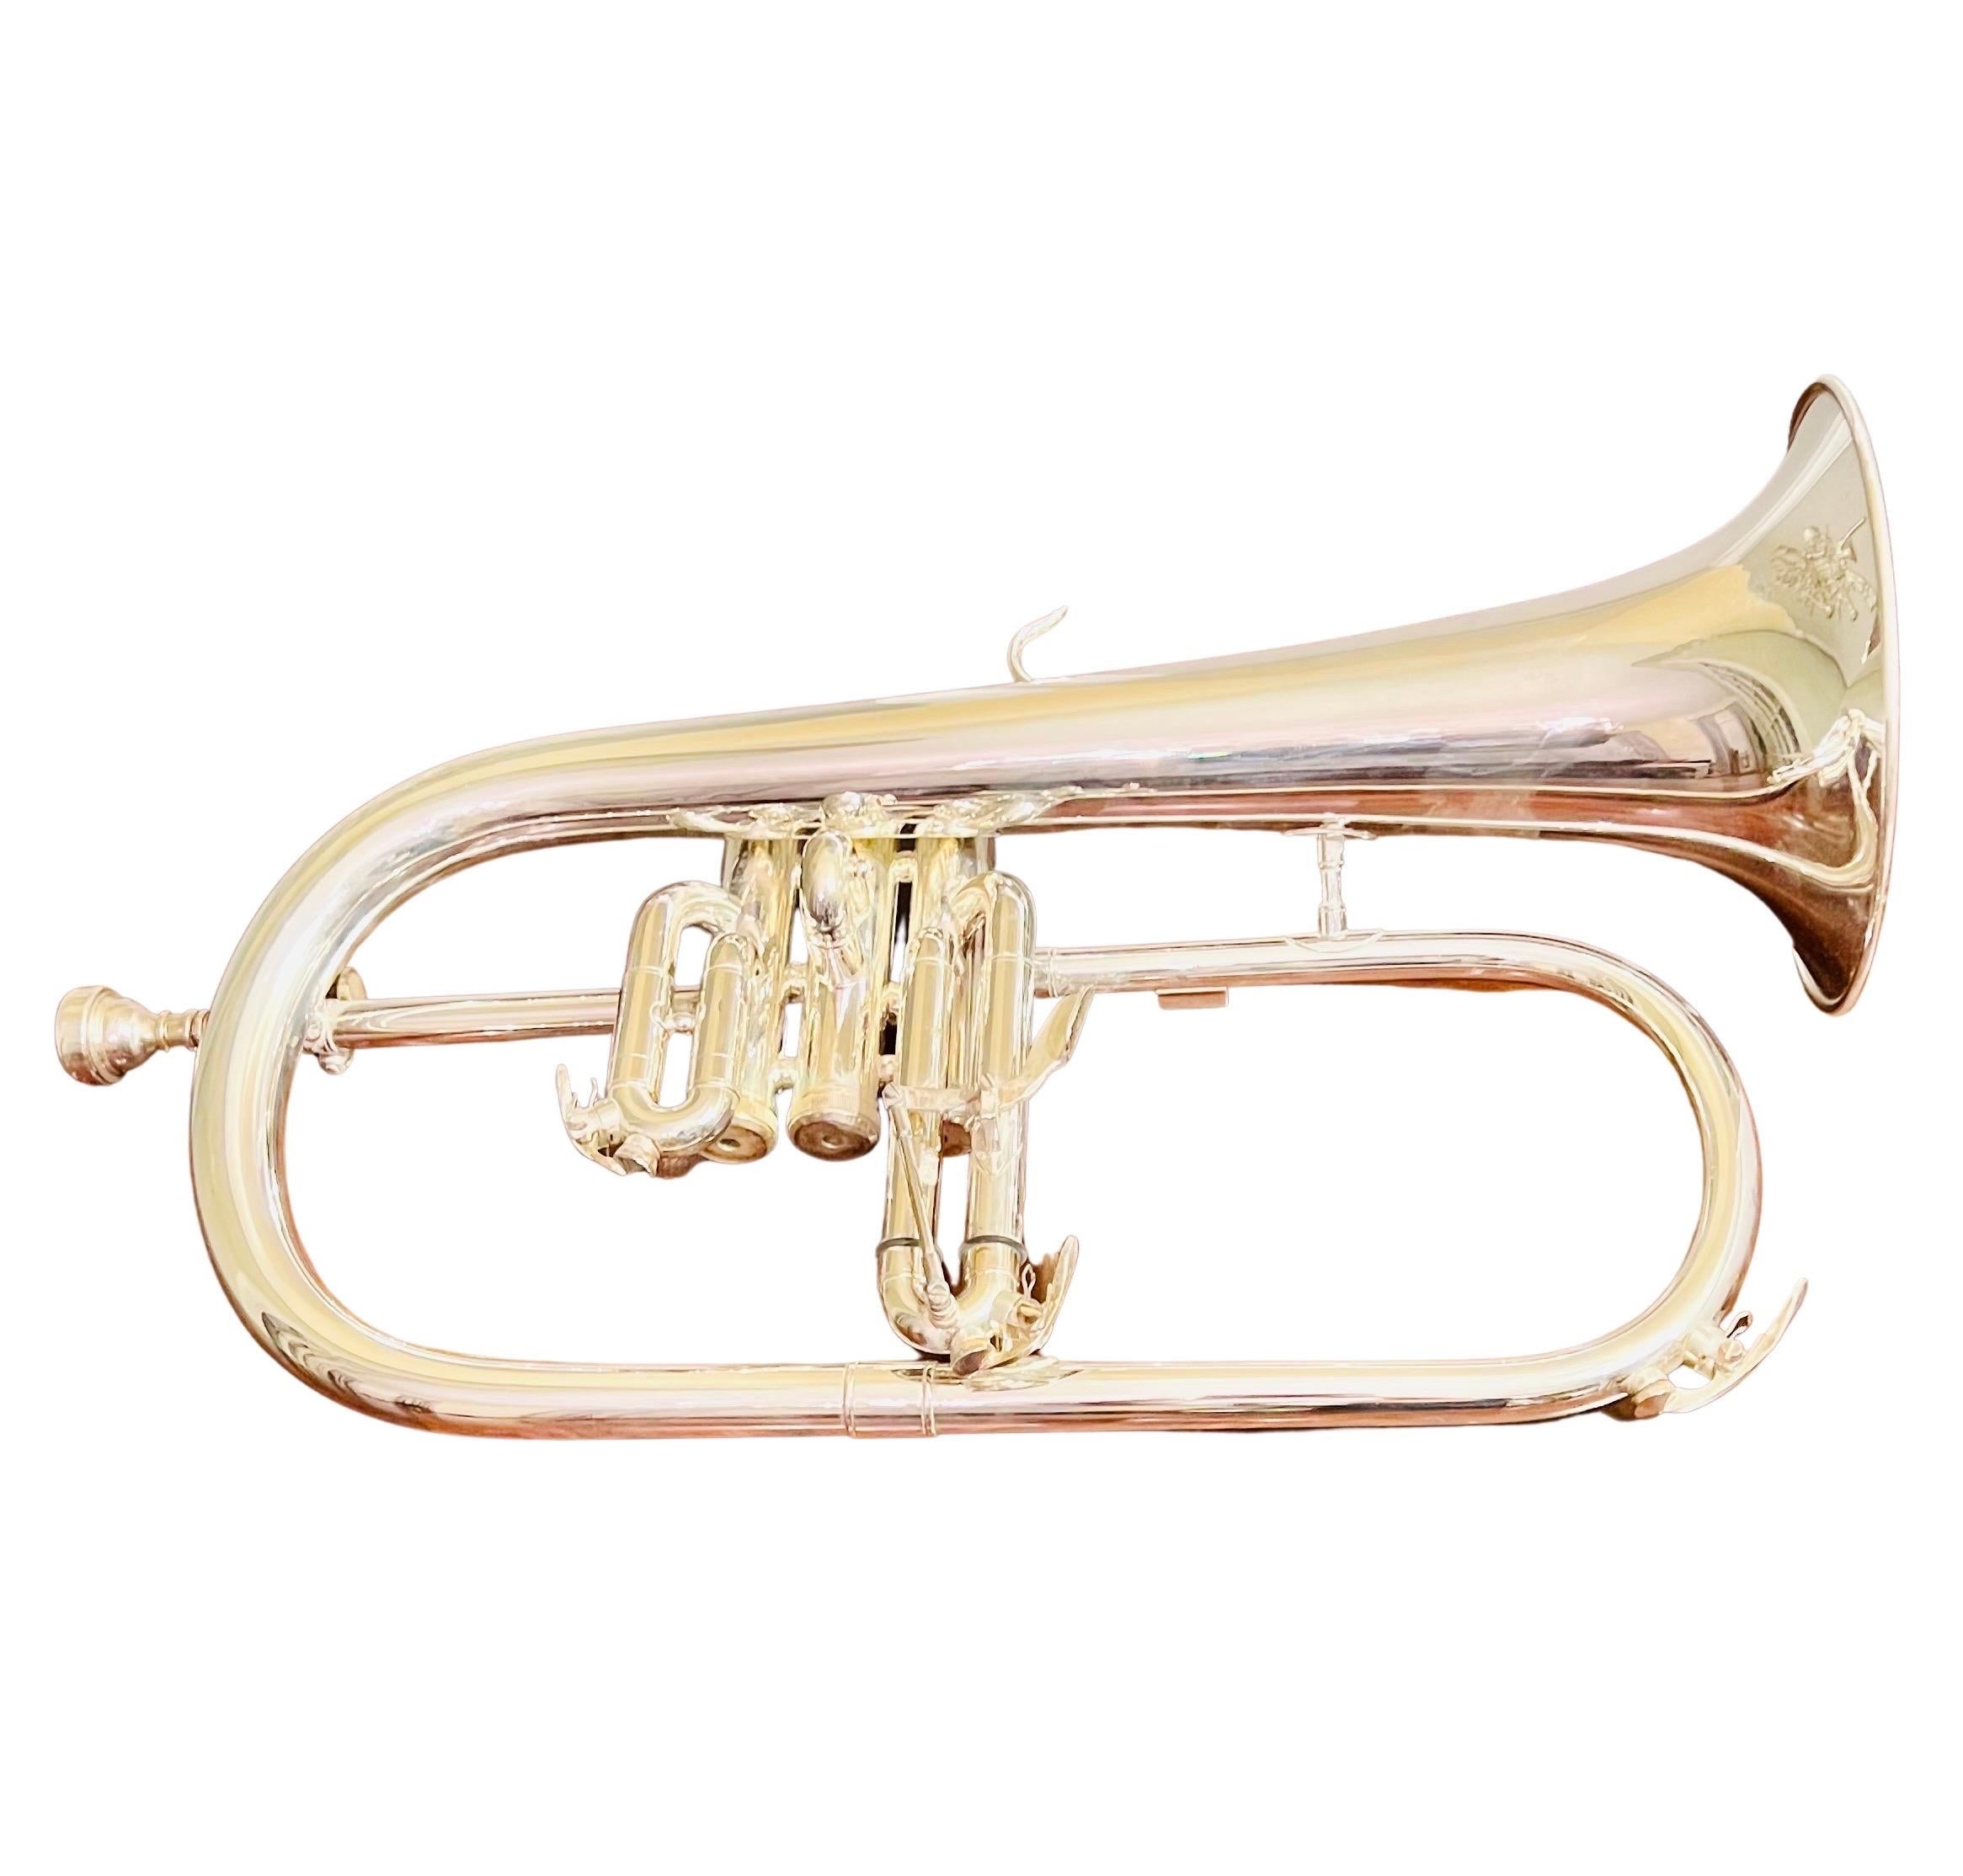 R.S. Berkely silver plated flugelhorn, model FLU669, 2006.  

If used for playing, this horn is suitable for intermediate and professional trumpeters.  Recognized for its durable construction, responsiveness and ability to stay in tune.  The FLU669